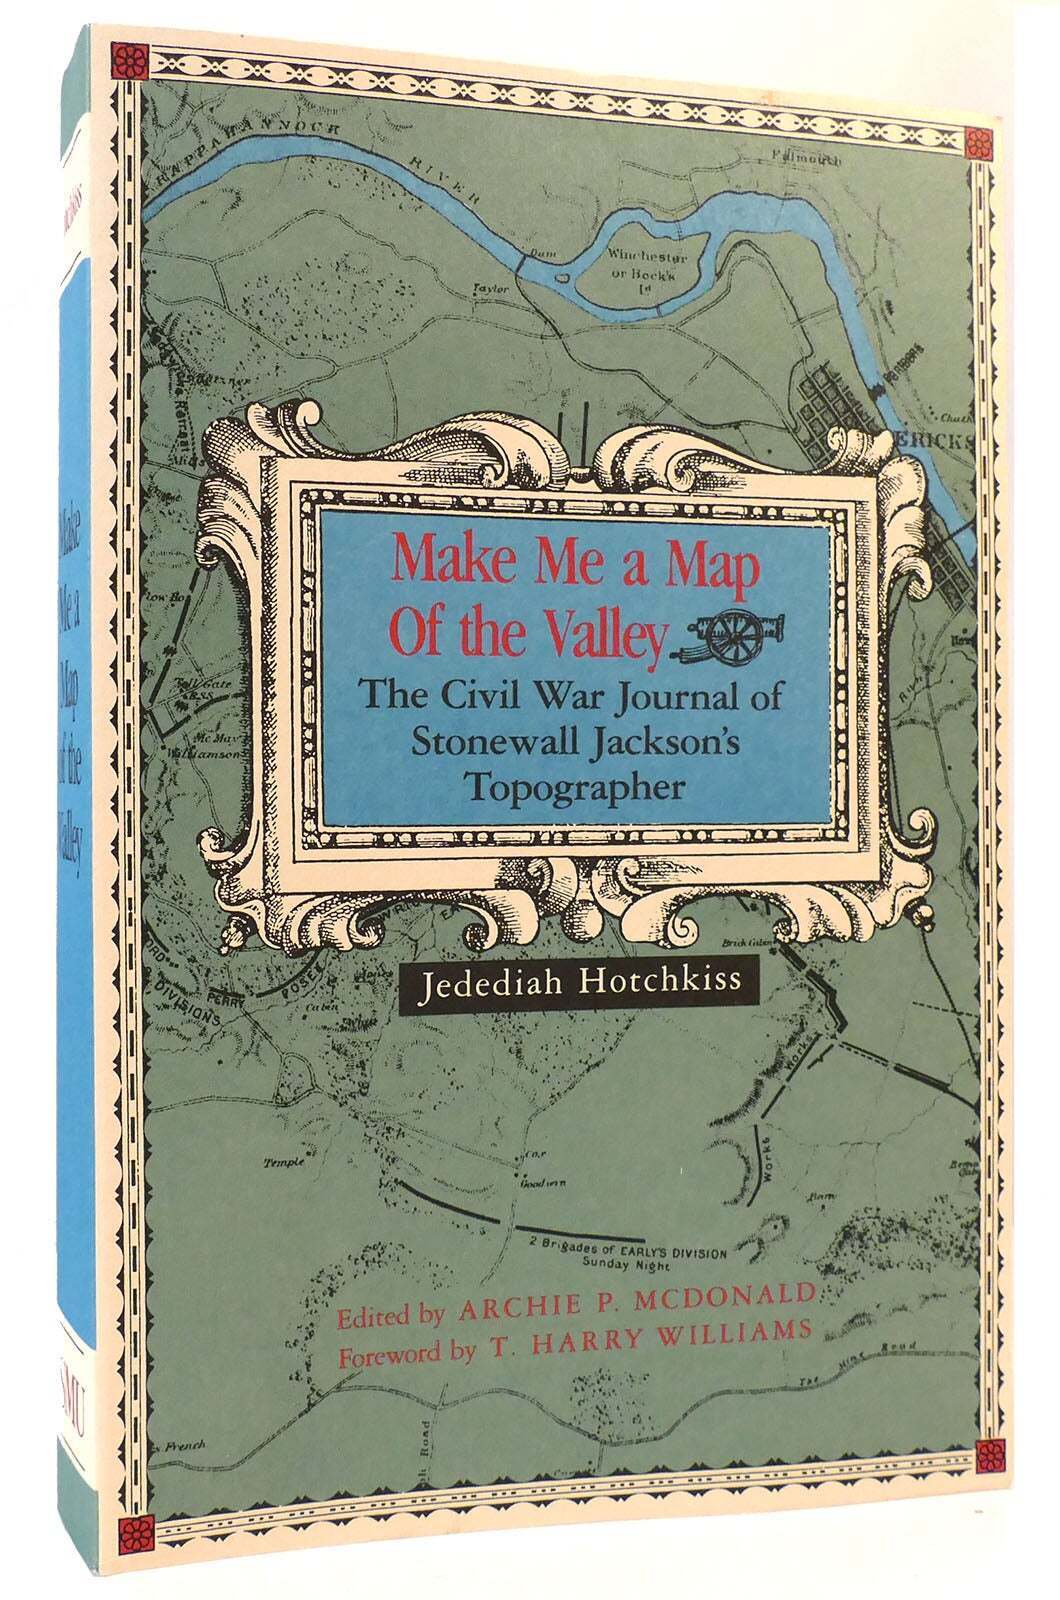 Jedediah Hotchkiss & Archie P. McDonald MAKE ME A MAP OF VALLEY The Civil War Jo